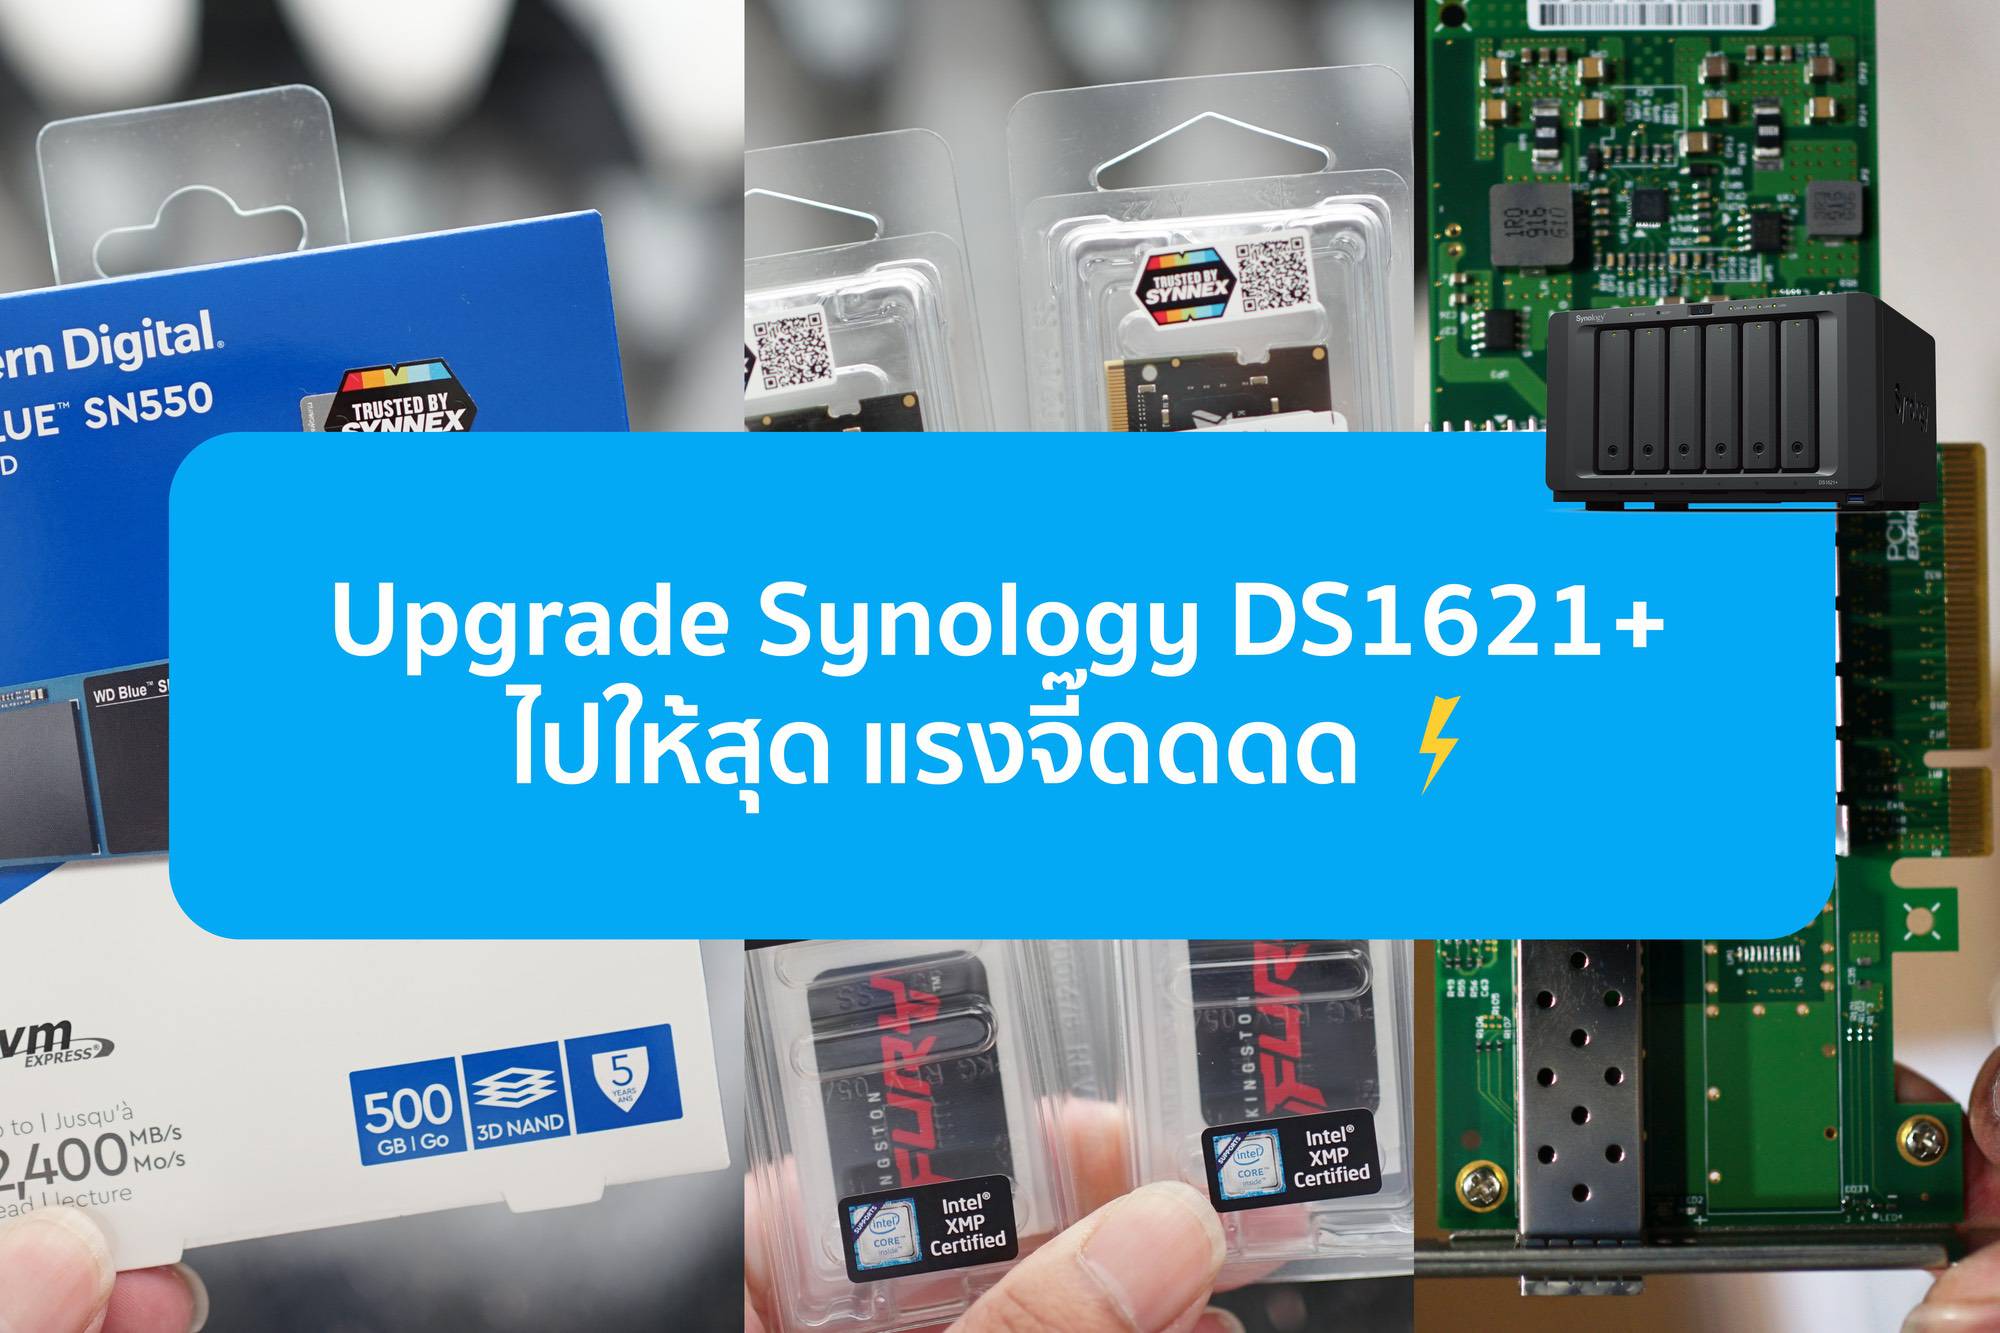 Upgrade Synology DS1621+ ไปให้สุด แรงจี๊ดดดด